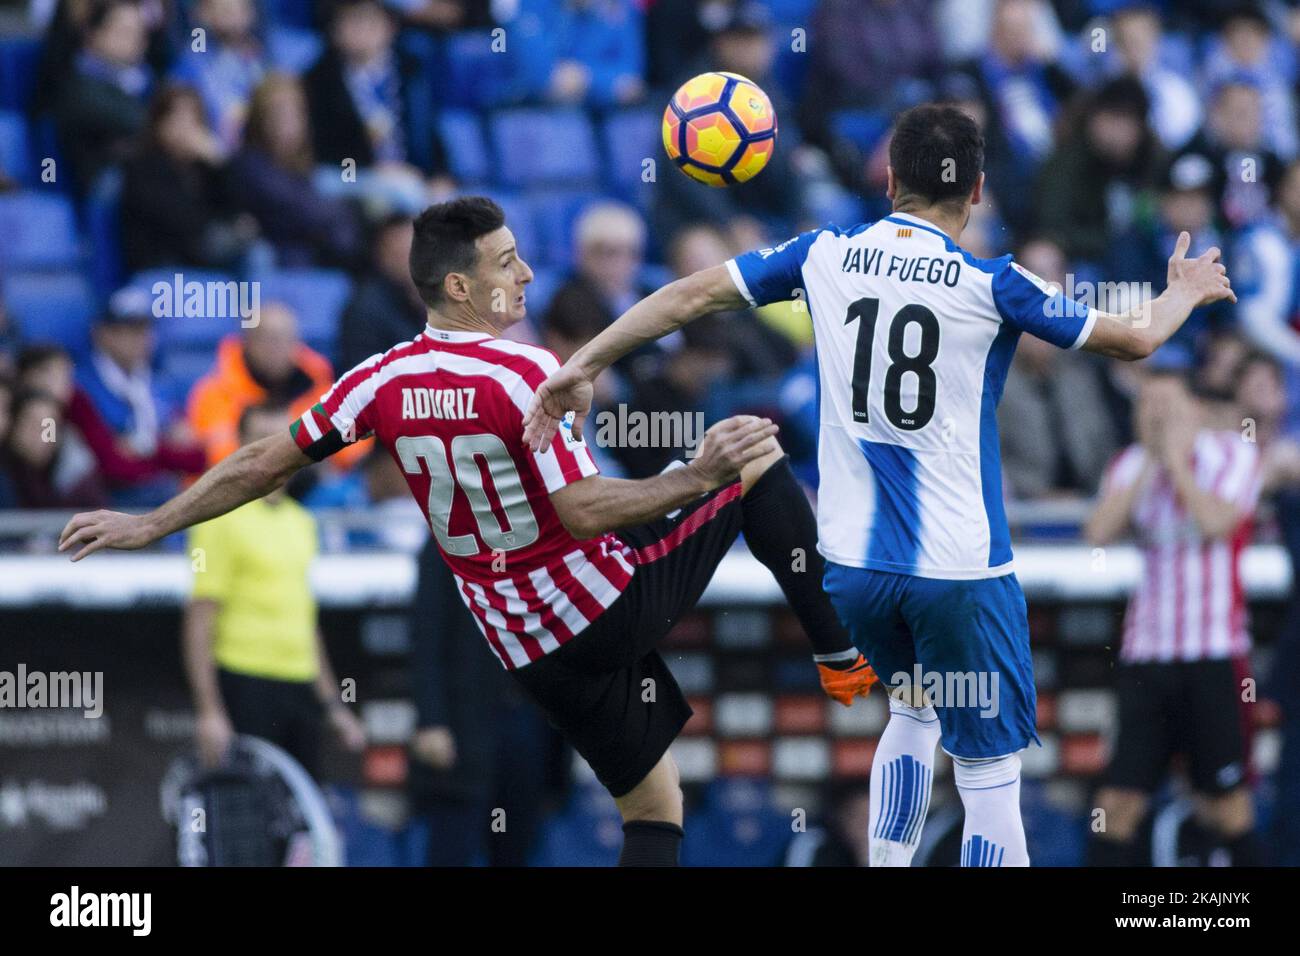 The Athletic Club de Bilbao player Aduriz from Spain and The RCD Espanyol player Javi Fuego from Spain in action during the La Liga between RCD Espanyol -  Athletic Club de Bilbao at RCD Stadium on November 6th, 2016 in Barcelona, Spain.  (Photo by Xavier Bonilla/NurPhoto) *** Please Use Credit from Credit Field *** Stock Photo